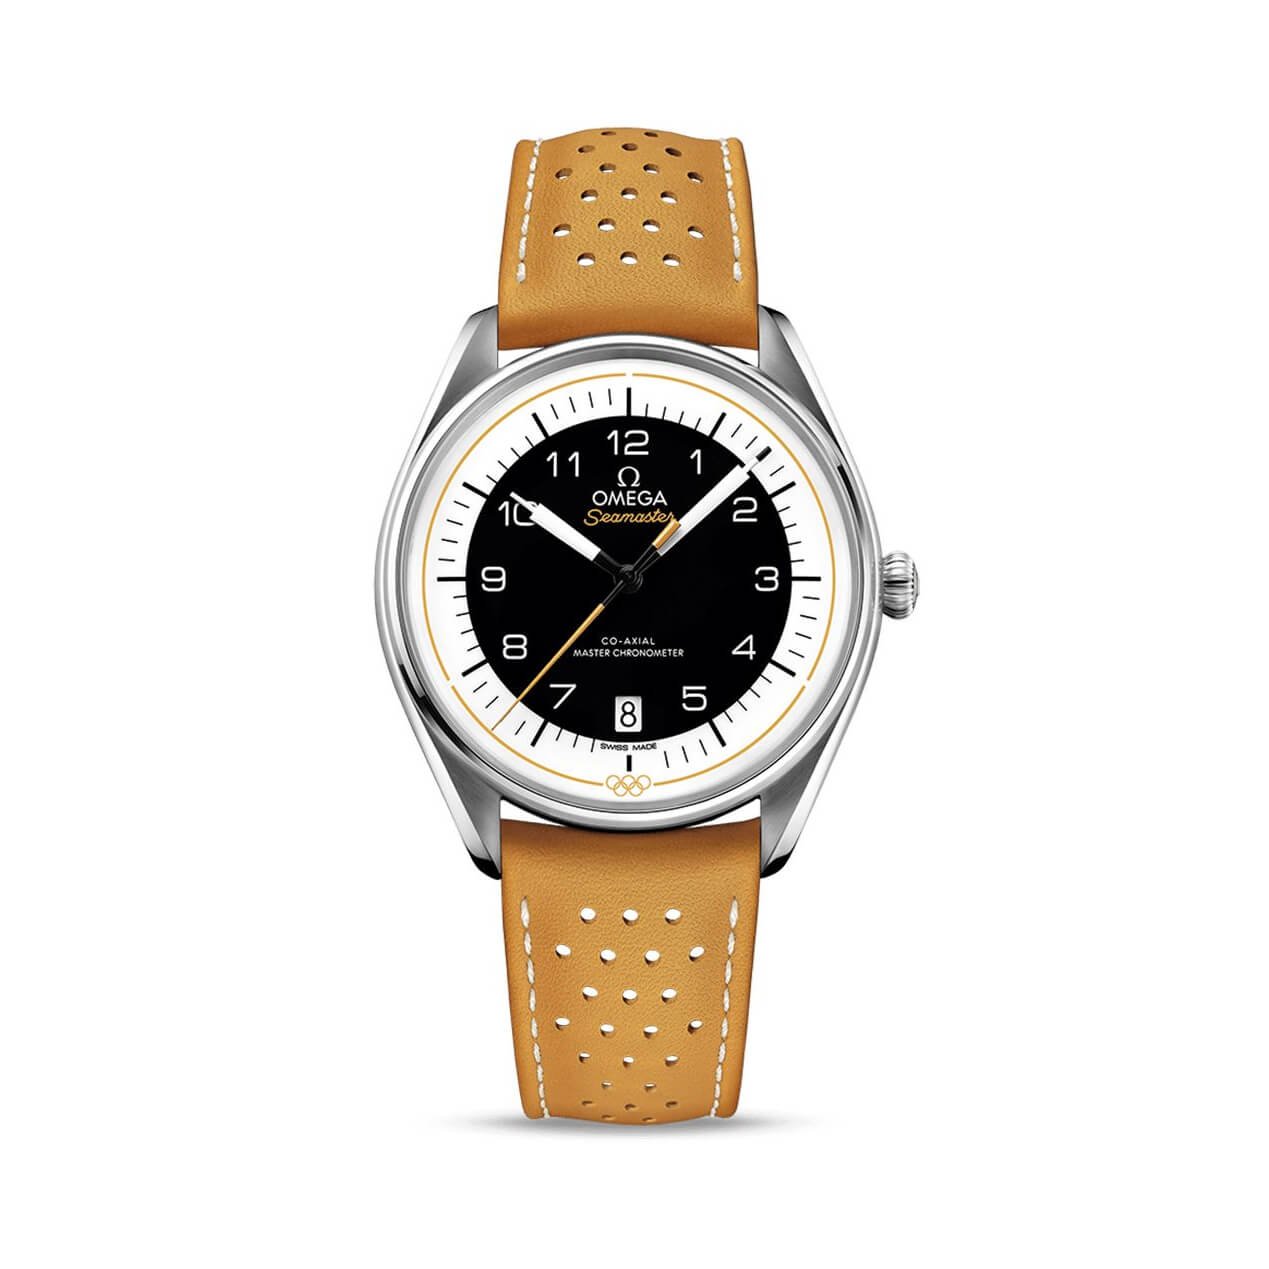 Omega Olympic Official Timekeeper